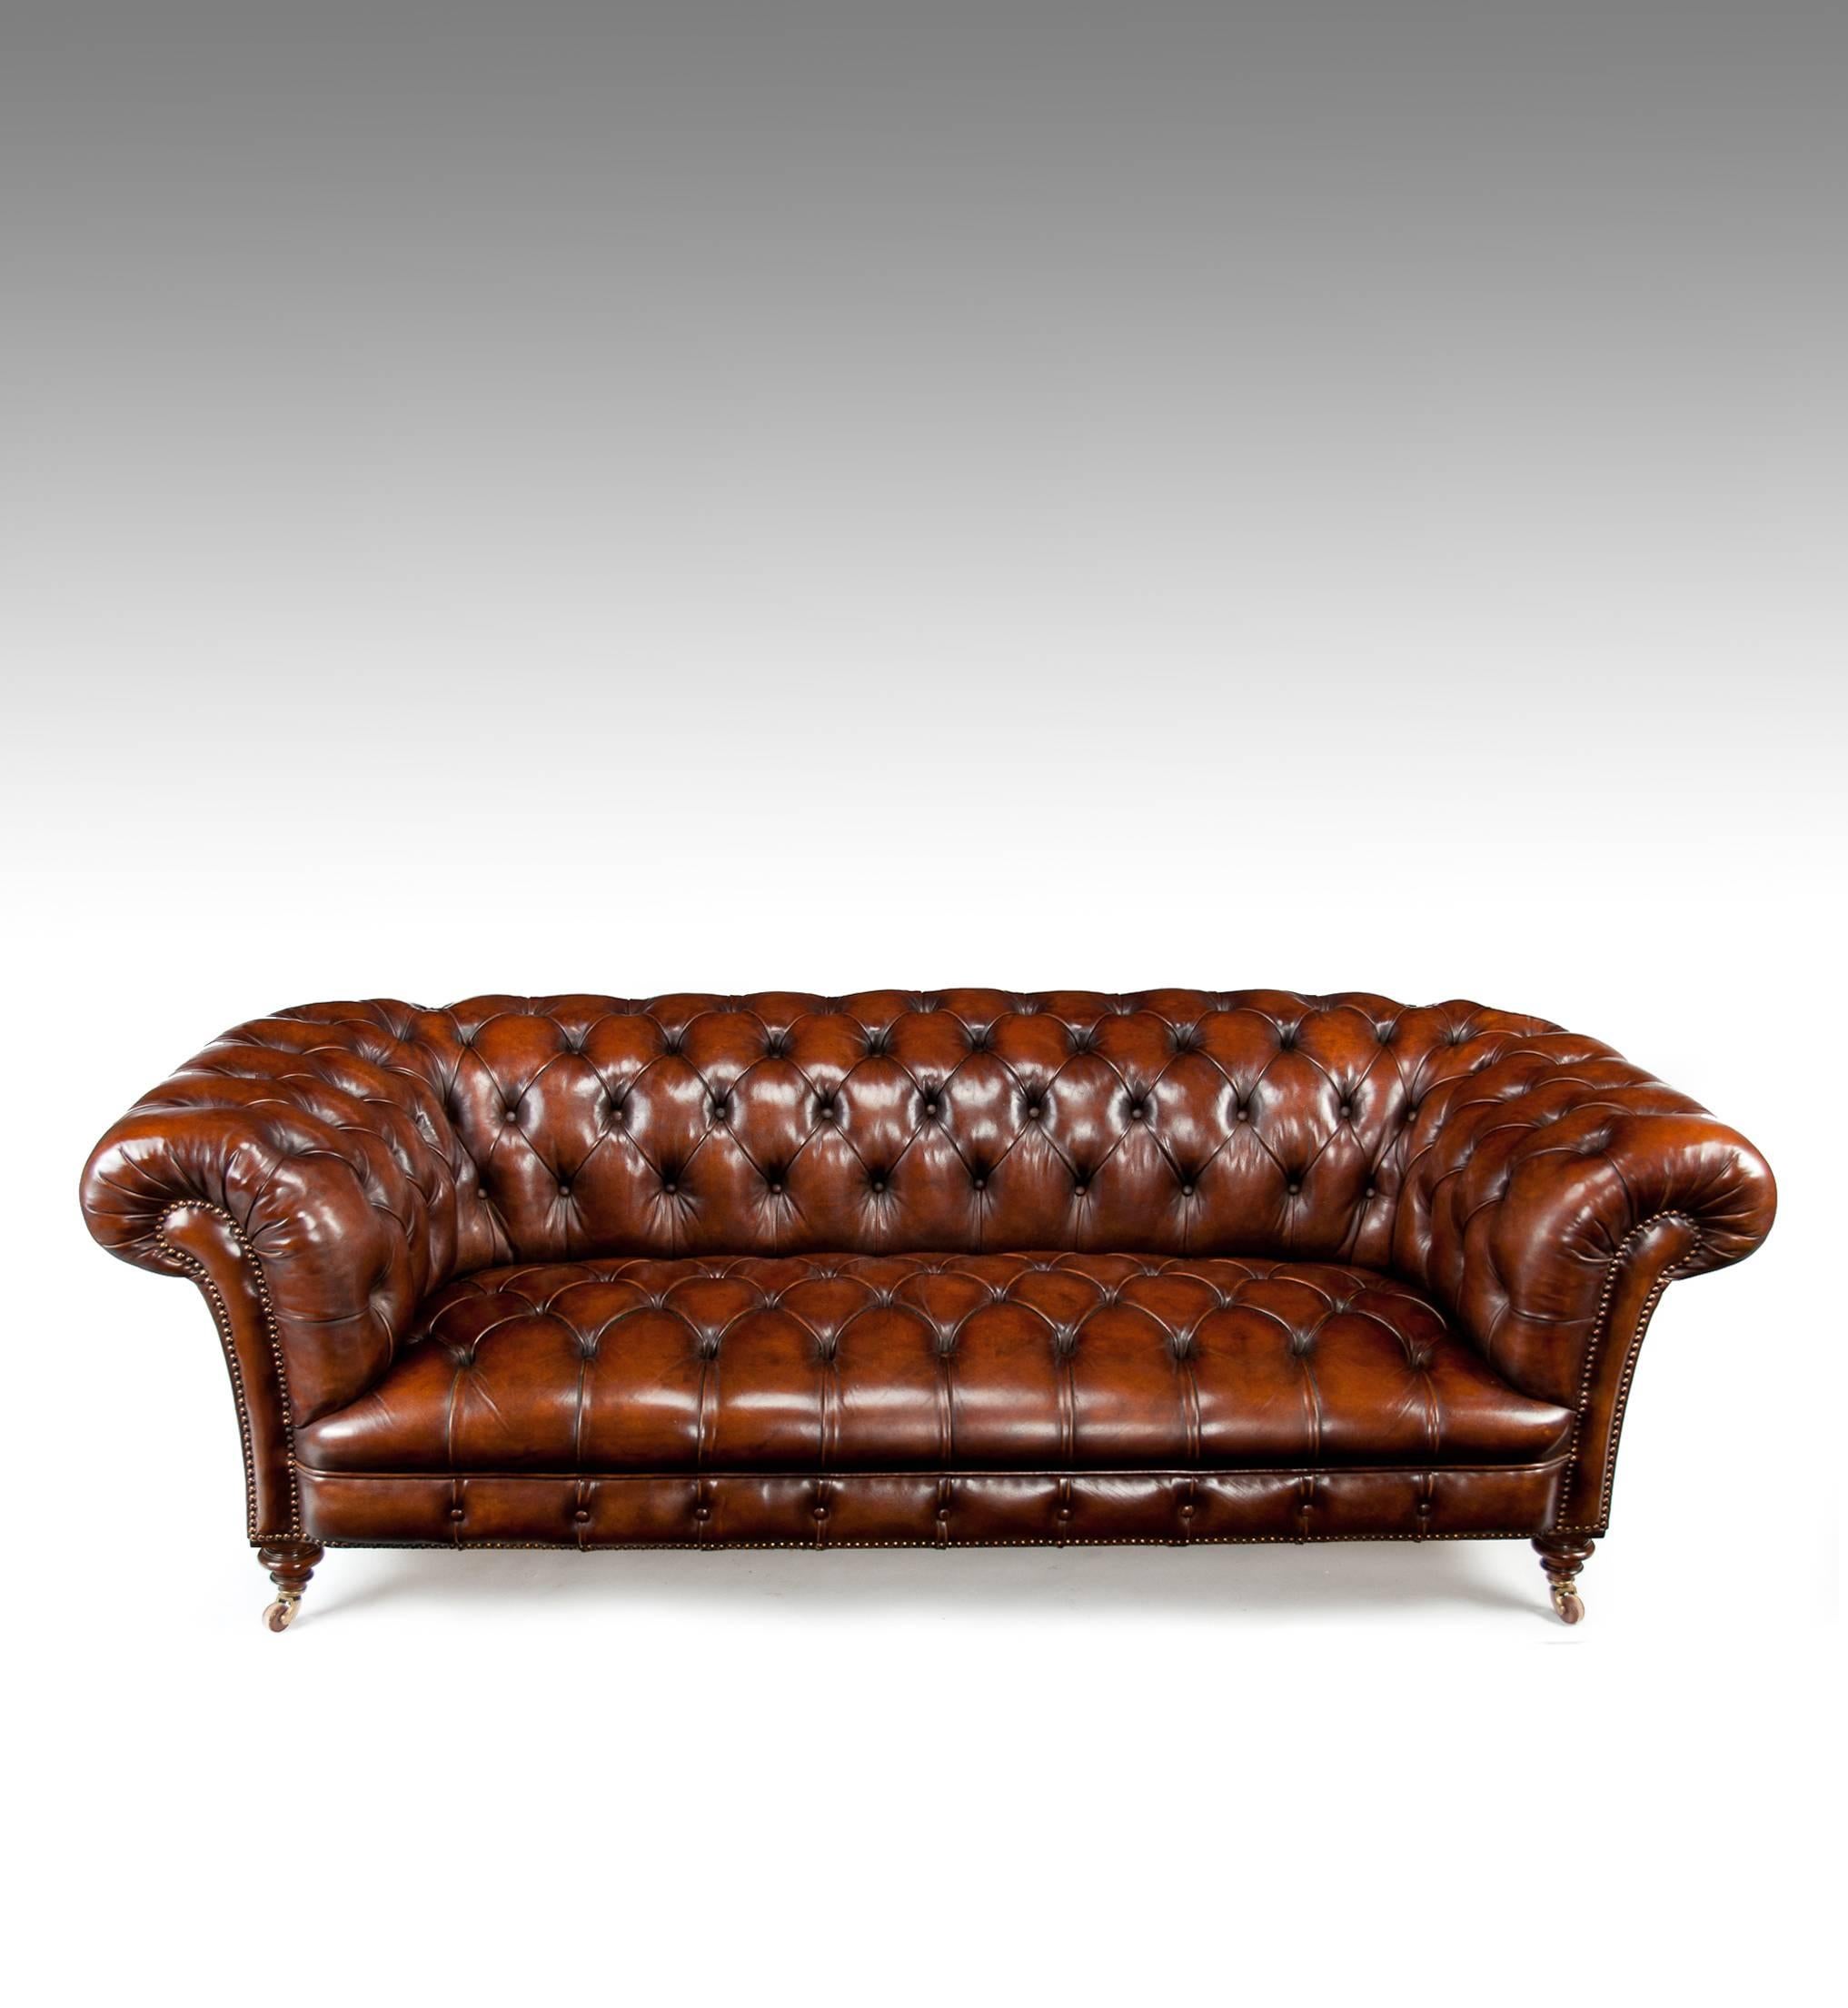 19th Century Victorian James Jas Shoolbred Leather Walnut Chesterfield Fully Stamped